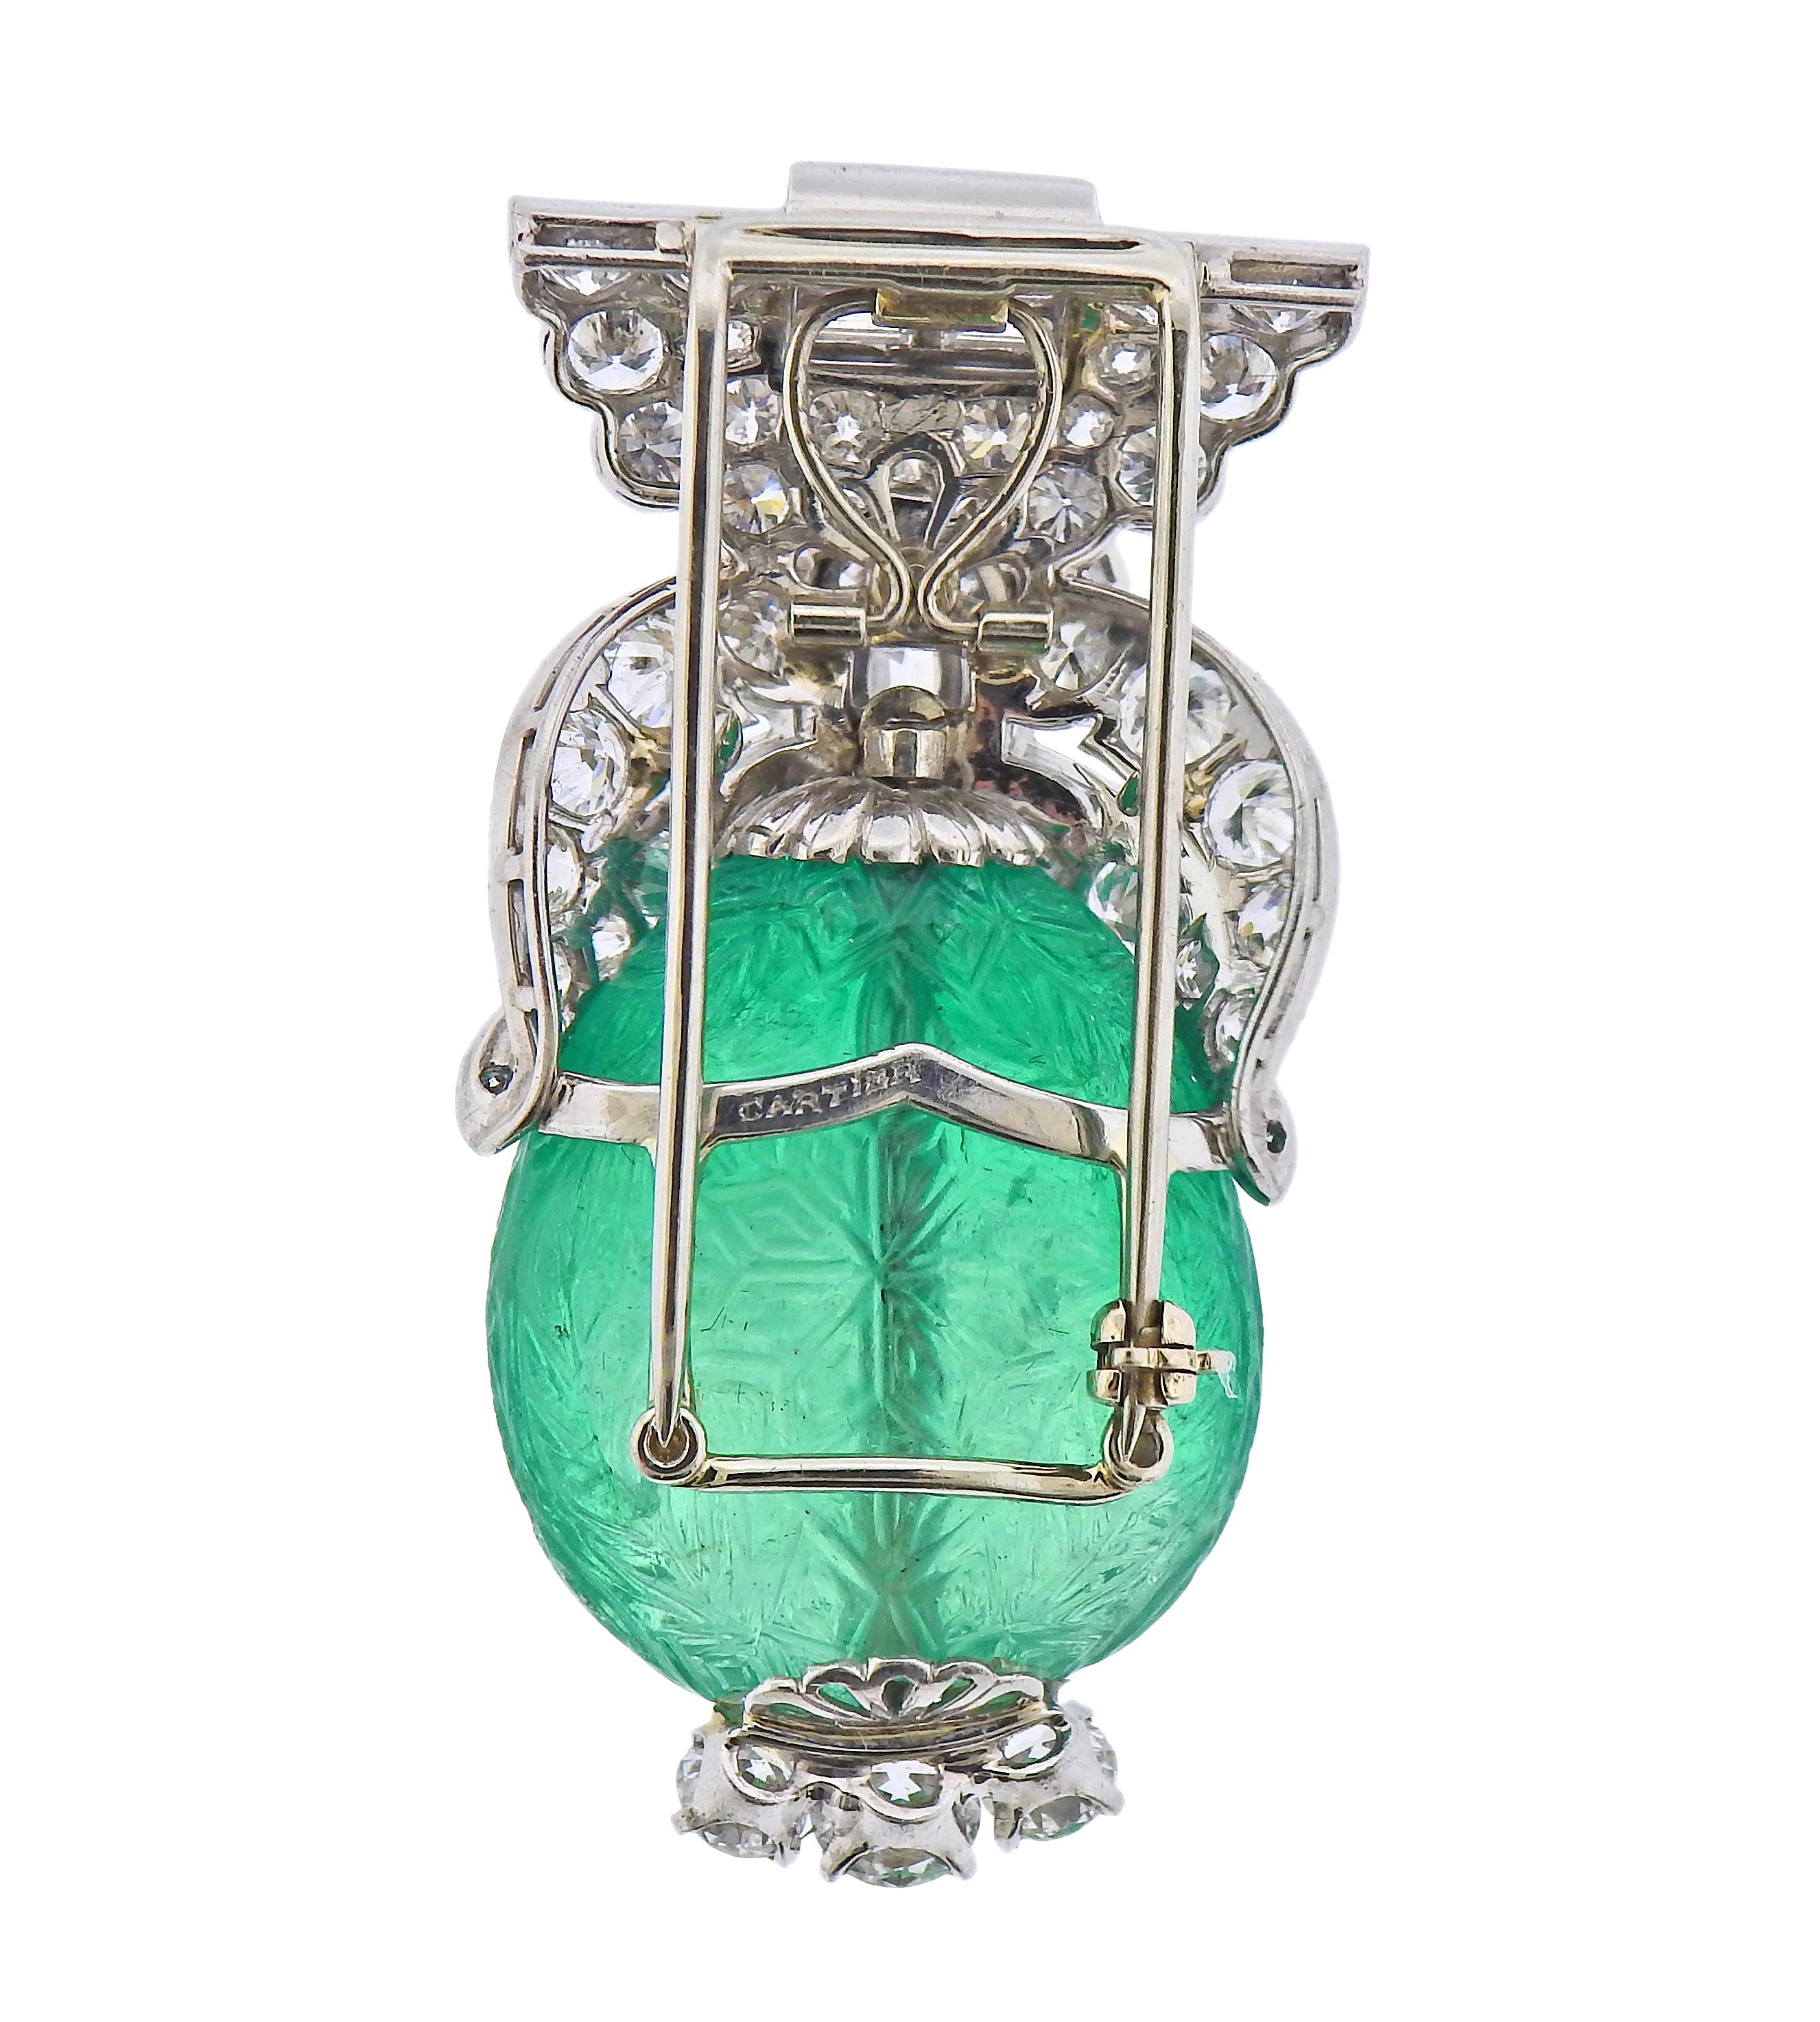 Exquisite platinum Cartier brooch, set with an approx. 65 carat carved emerald, measuring 25mm x 25mm x 11.4mm, surrounded with a total of approx. 7.50-8.00 carats in diamonds. Center marquise diamond is approx. 1.51ct . Brooch measures 52mm x 28mm.